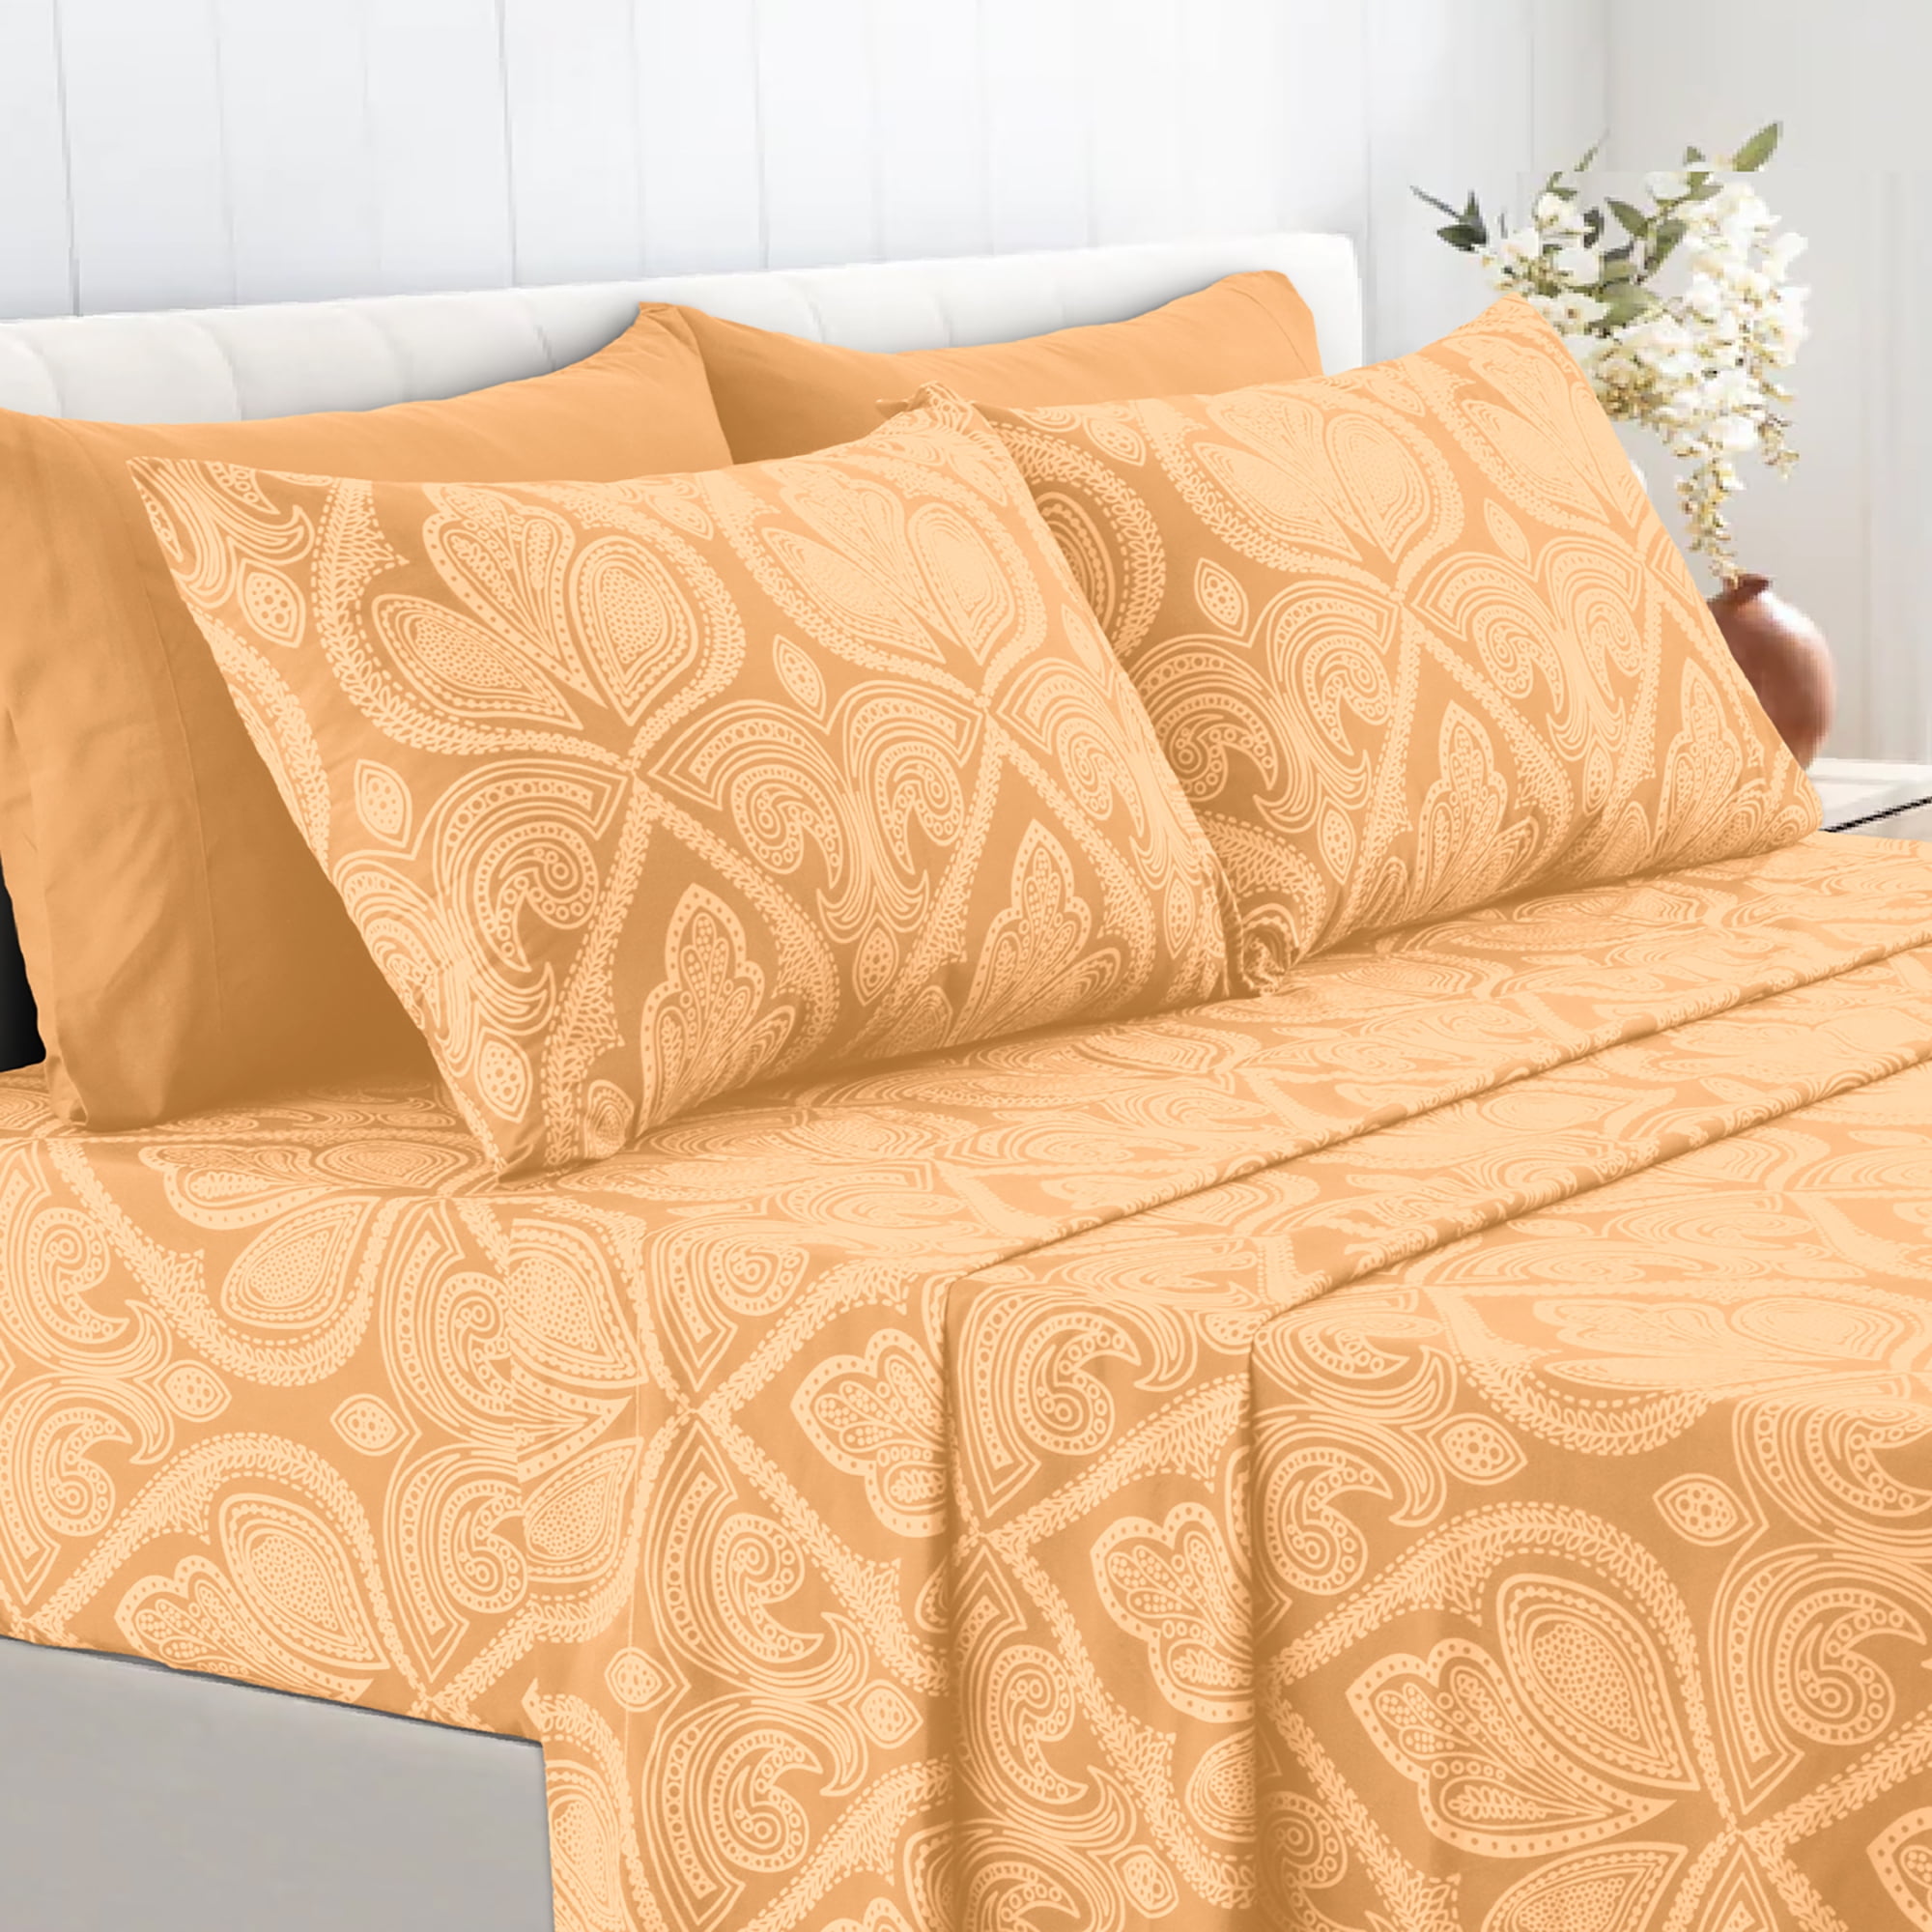 Details about   Lux Decor Collection Bedsheet Set Brushed Microfiber 1800 Thread Count Bedding 